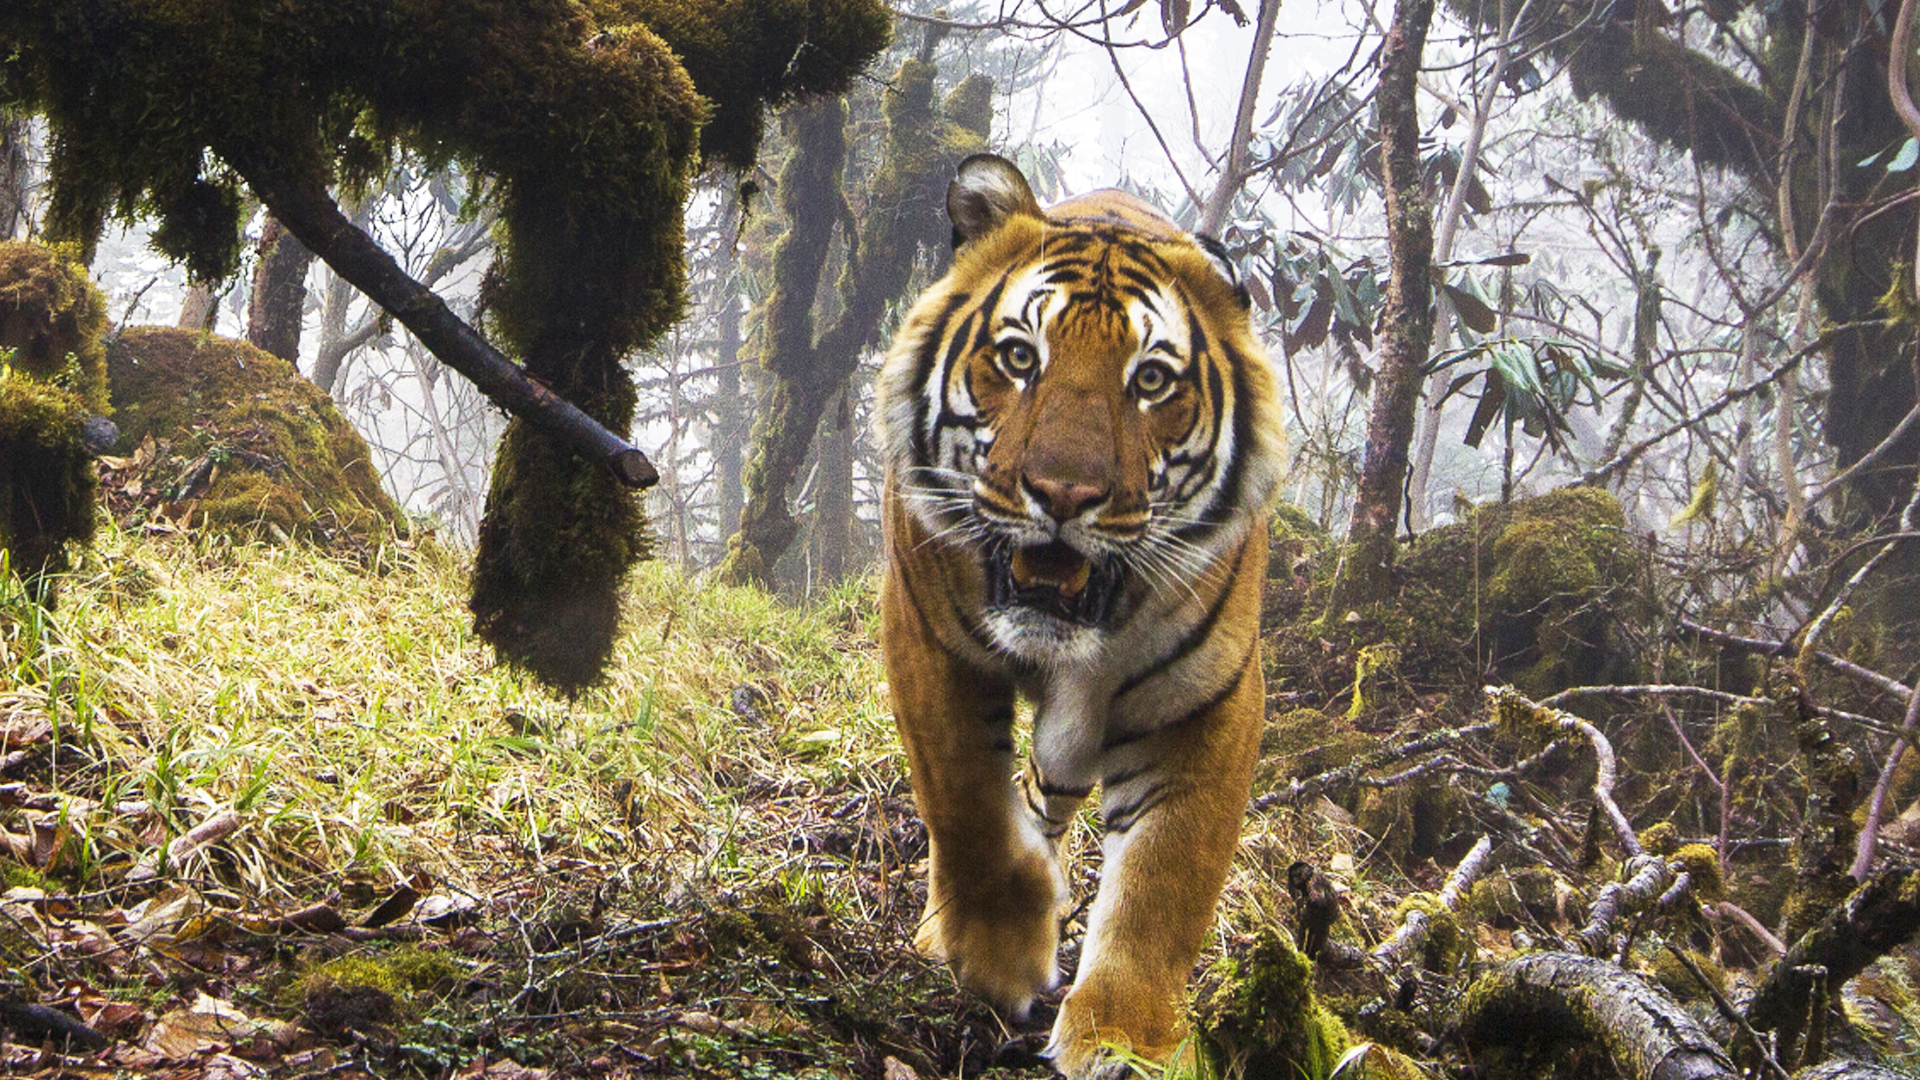 Watch: Extremely Rare Footage of Wild Tigers in Bhutan